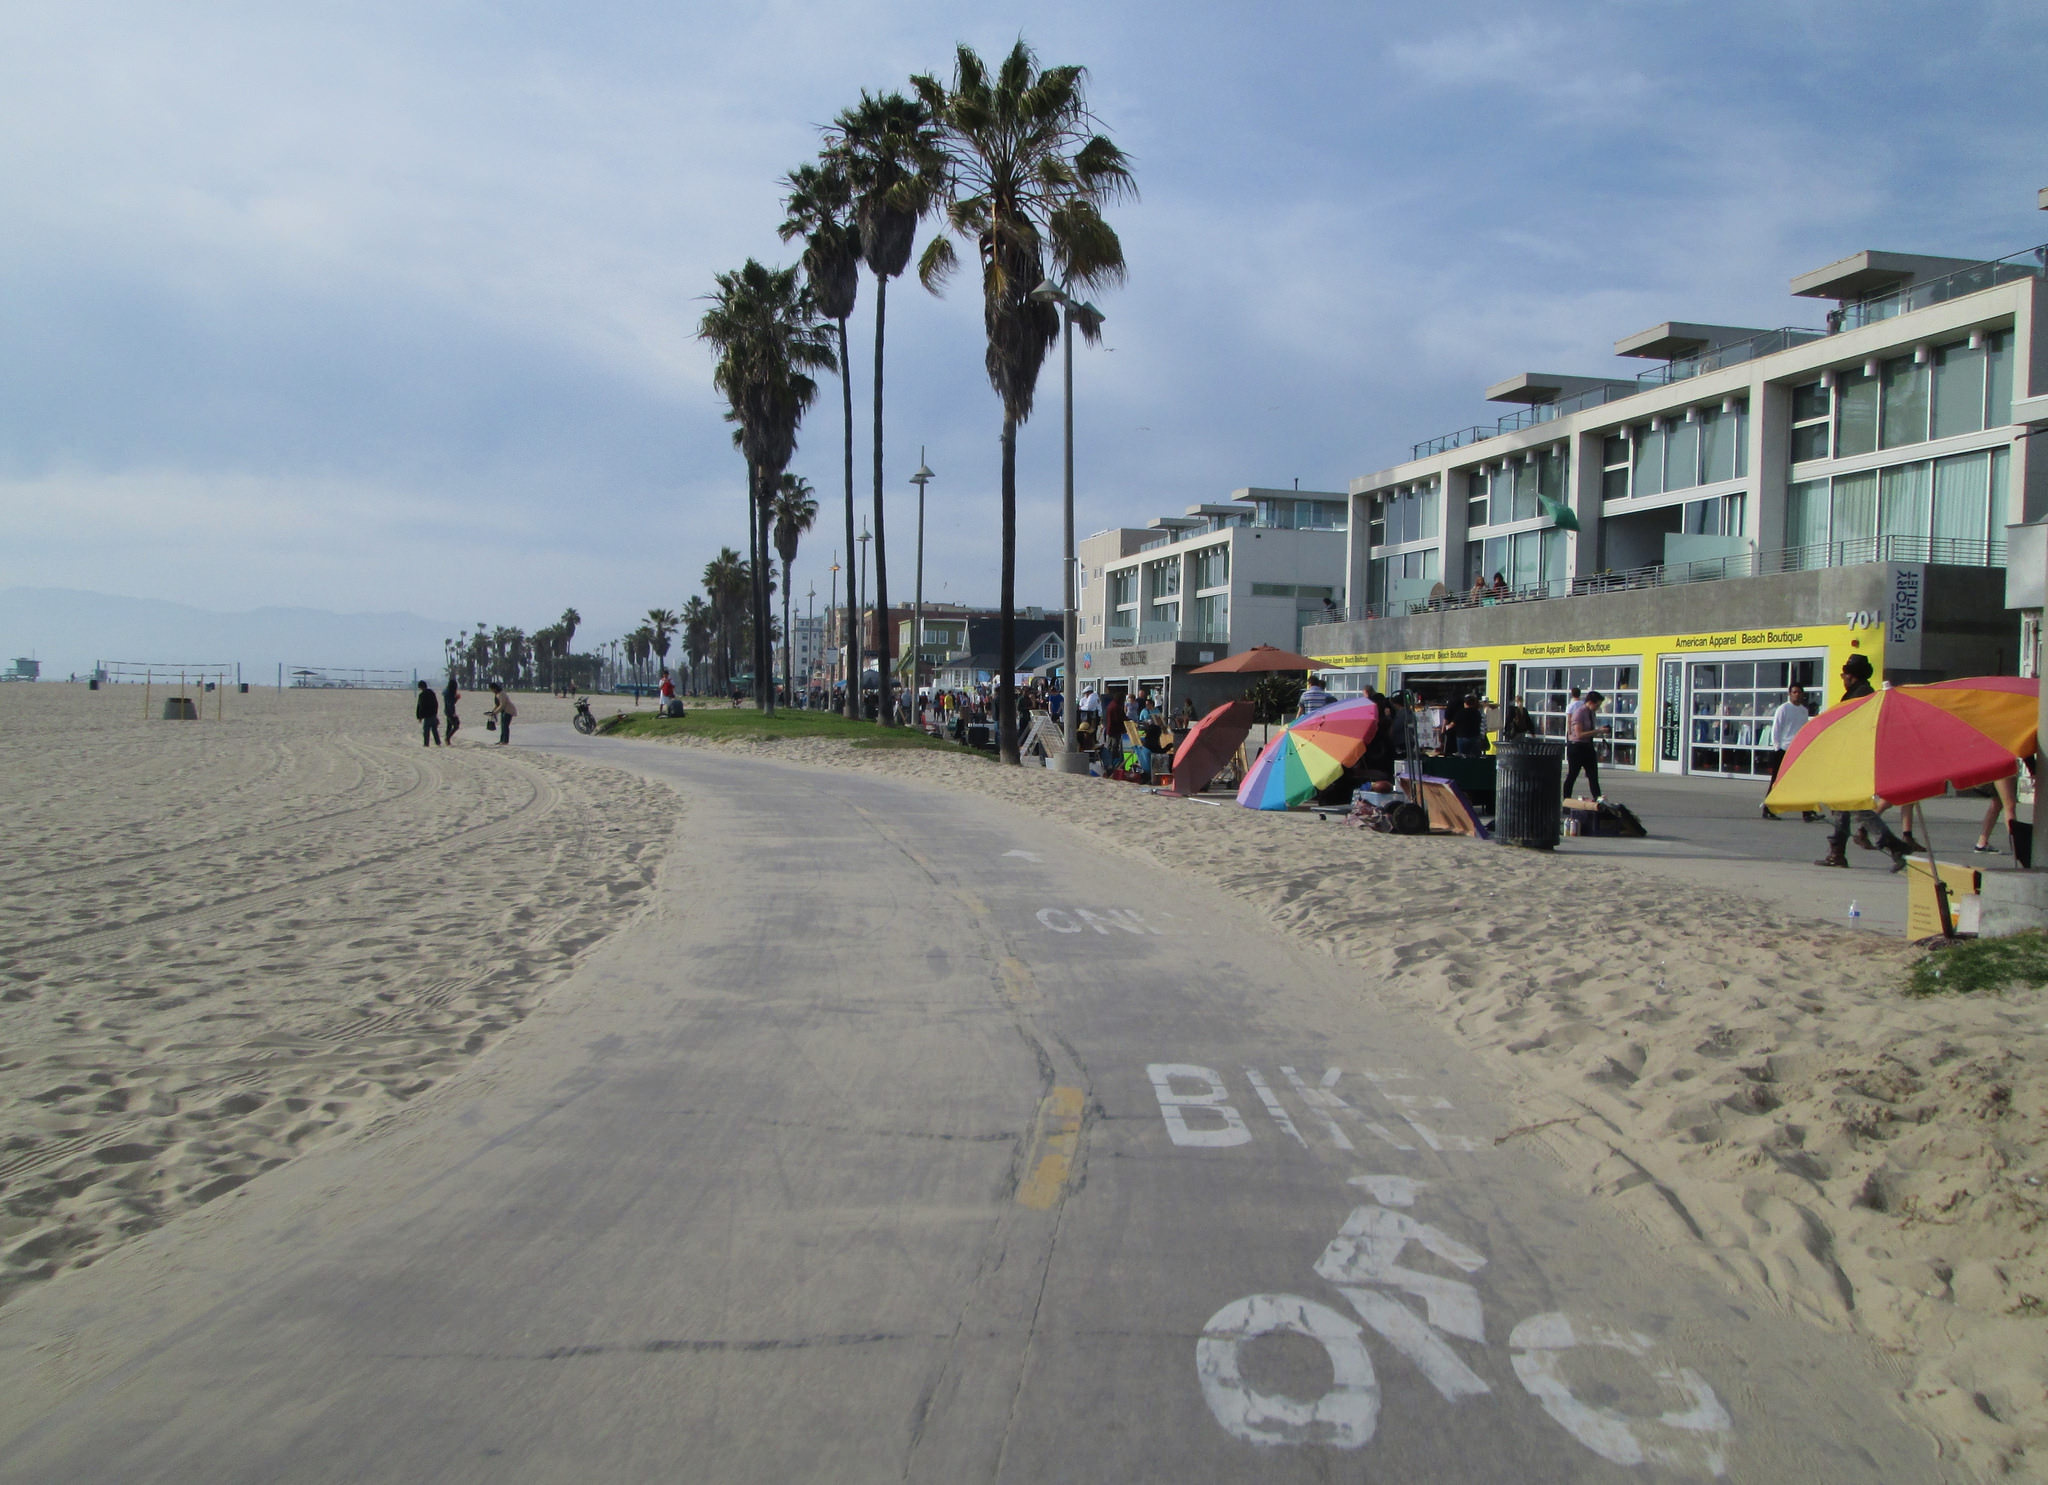 The Top 10 Things to Do in Los Angeles 2017 beach bike ride